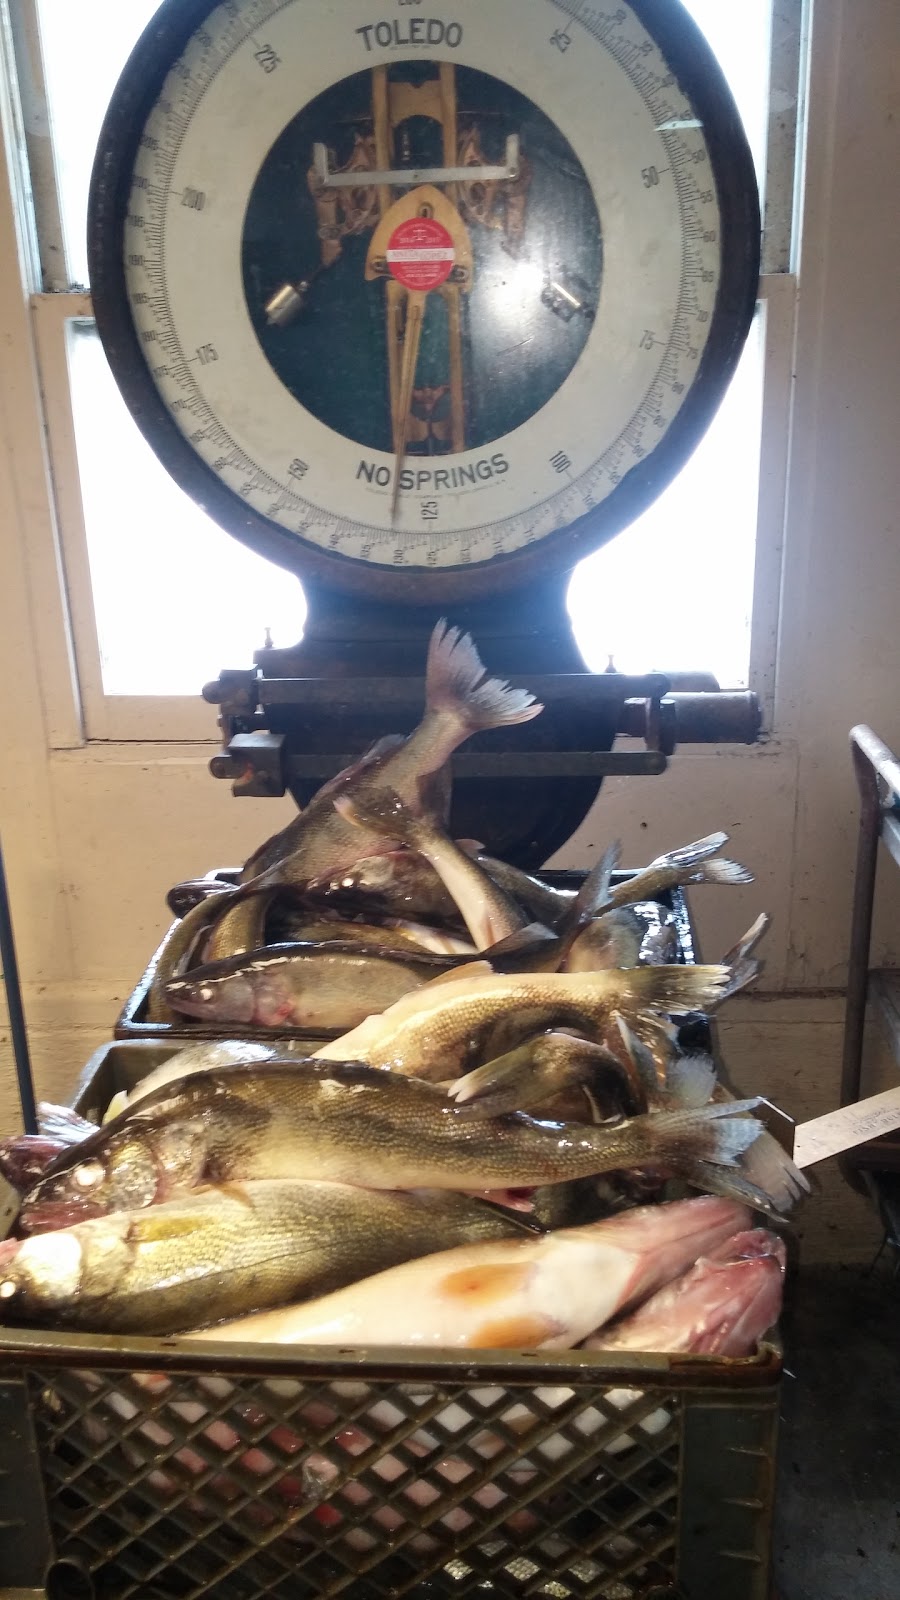 Shamrock Fishing Charters | 10955 Corduroy Rd, Curtice, OH 43412, USA | Phone: (419) 345-3948